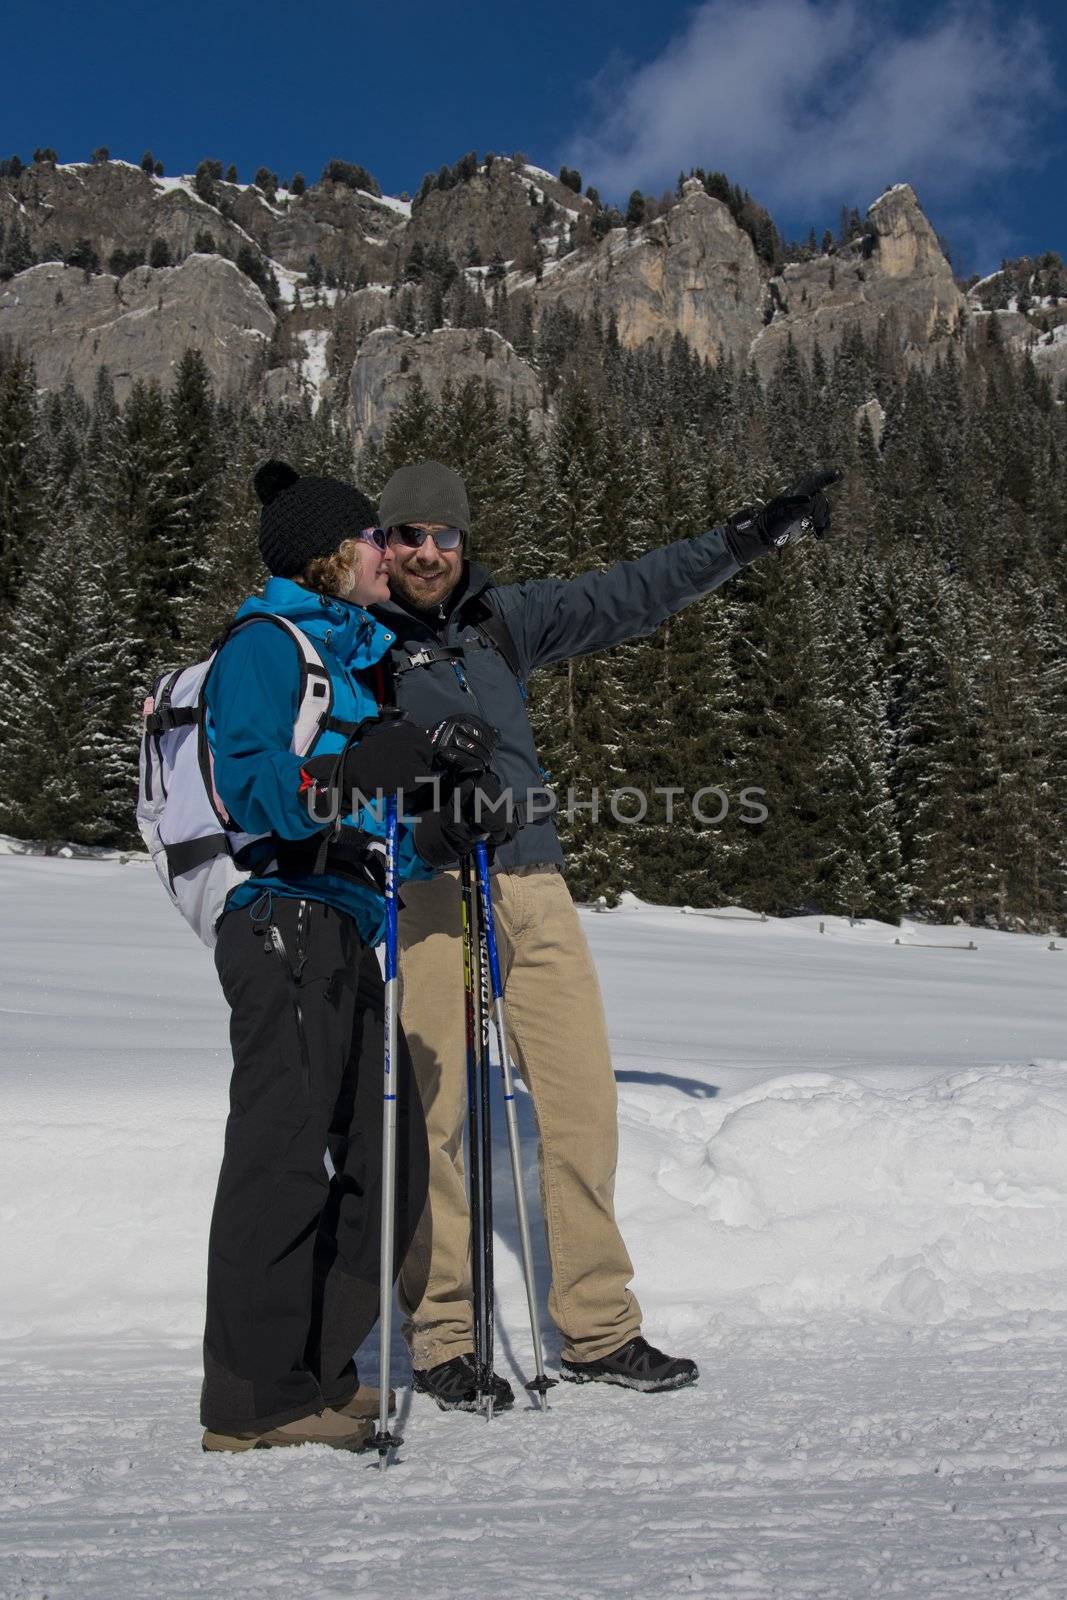 Couple of Hikers Pointing the Way on a snowy Trail by faabi